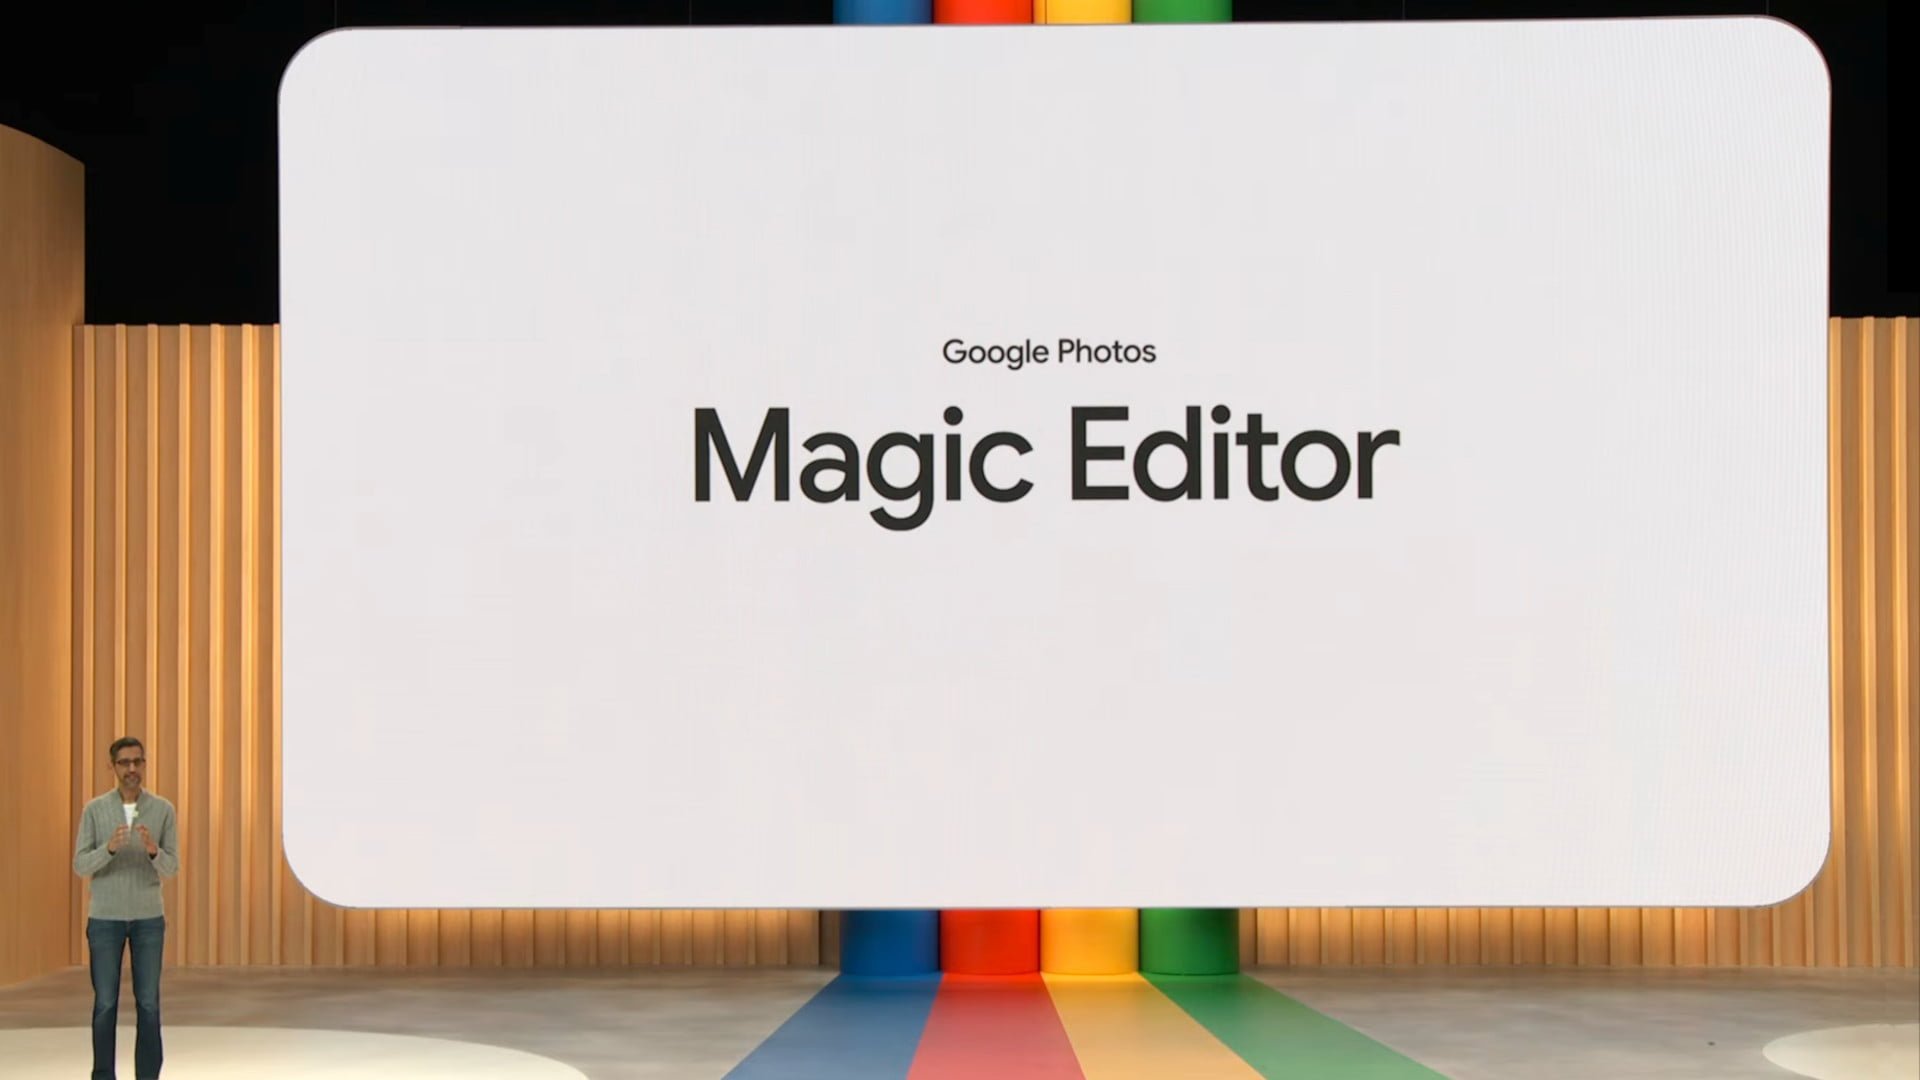 Magic Editor in Google Photos won't edit faces, documents, or large objects